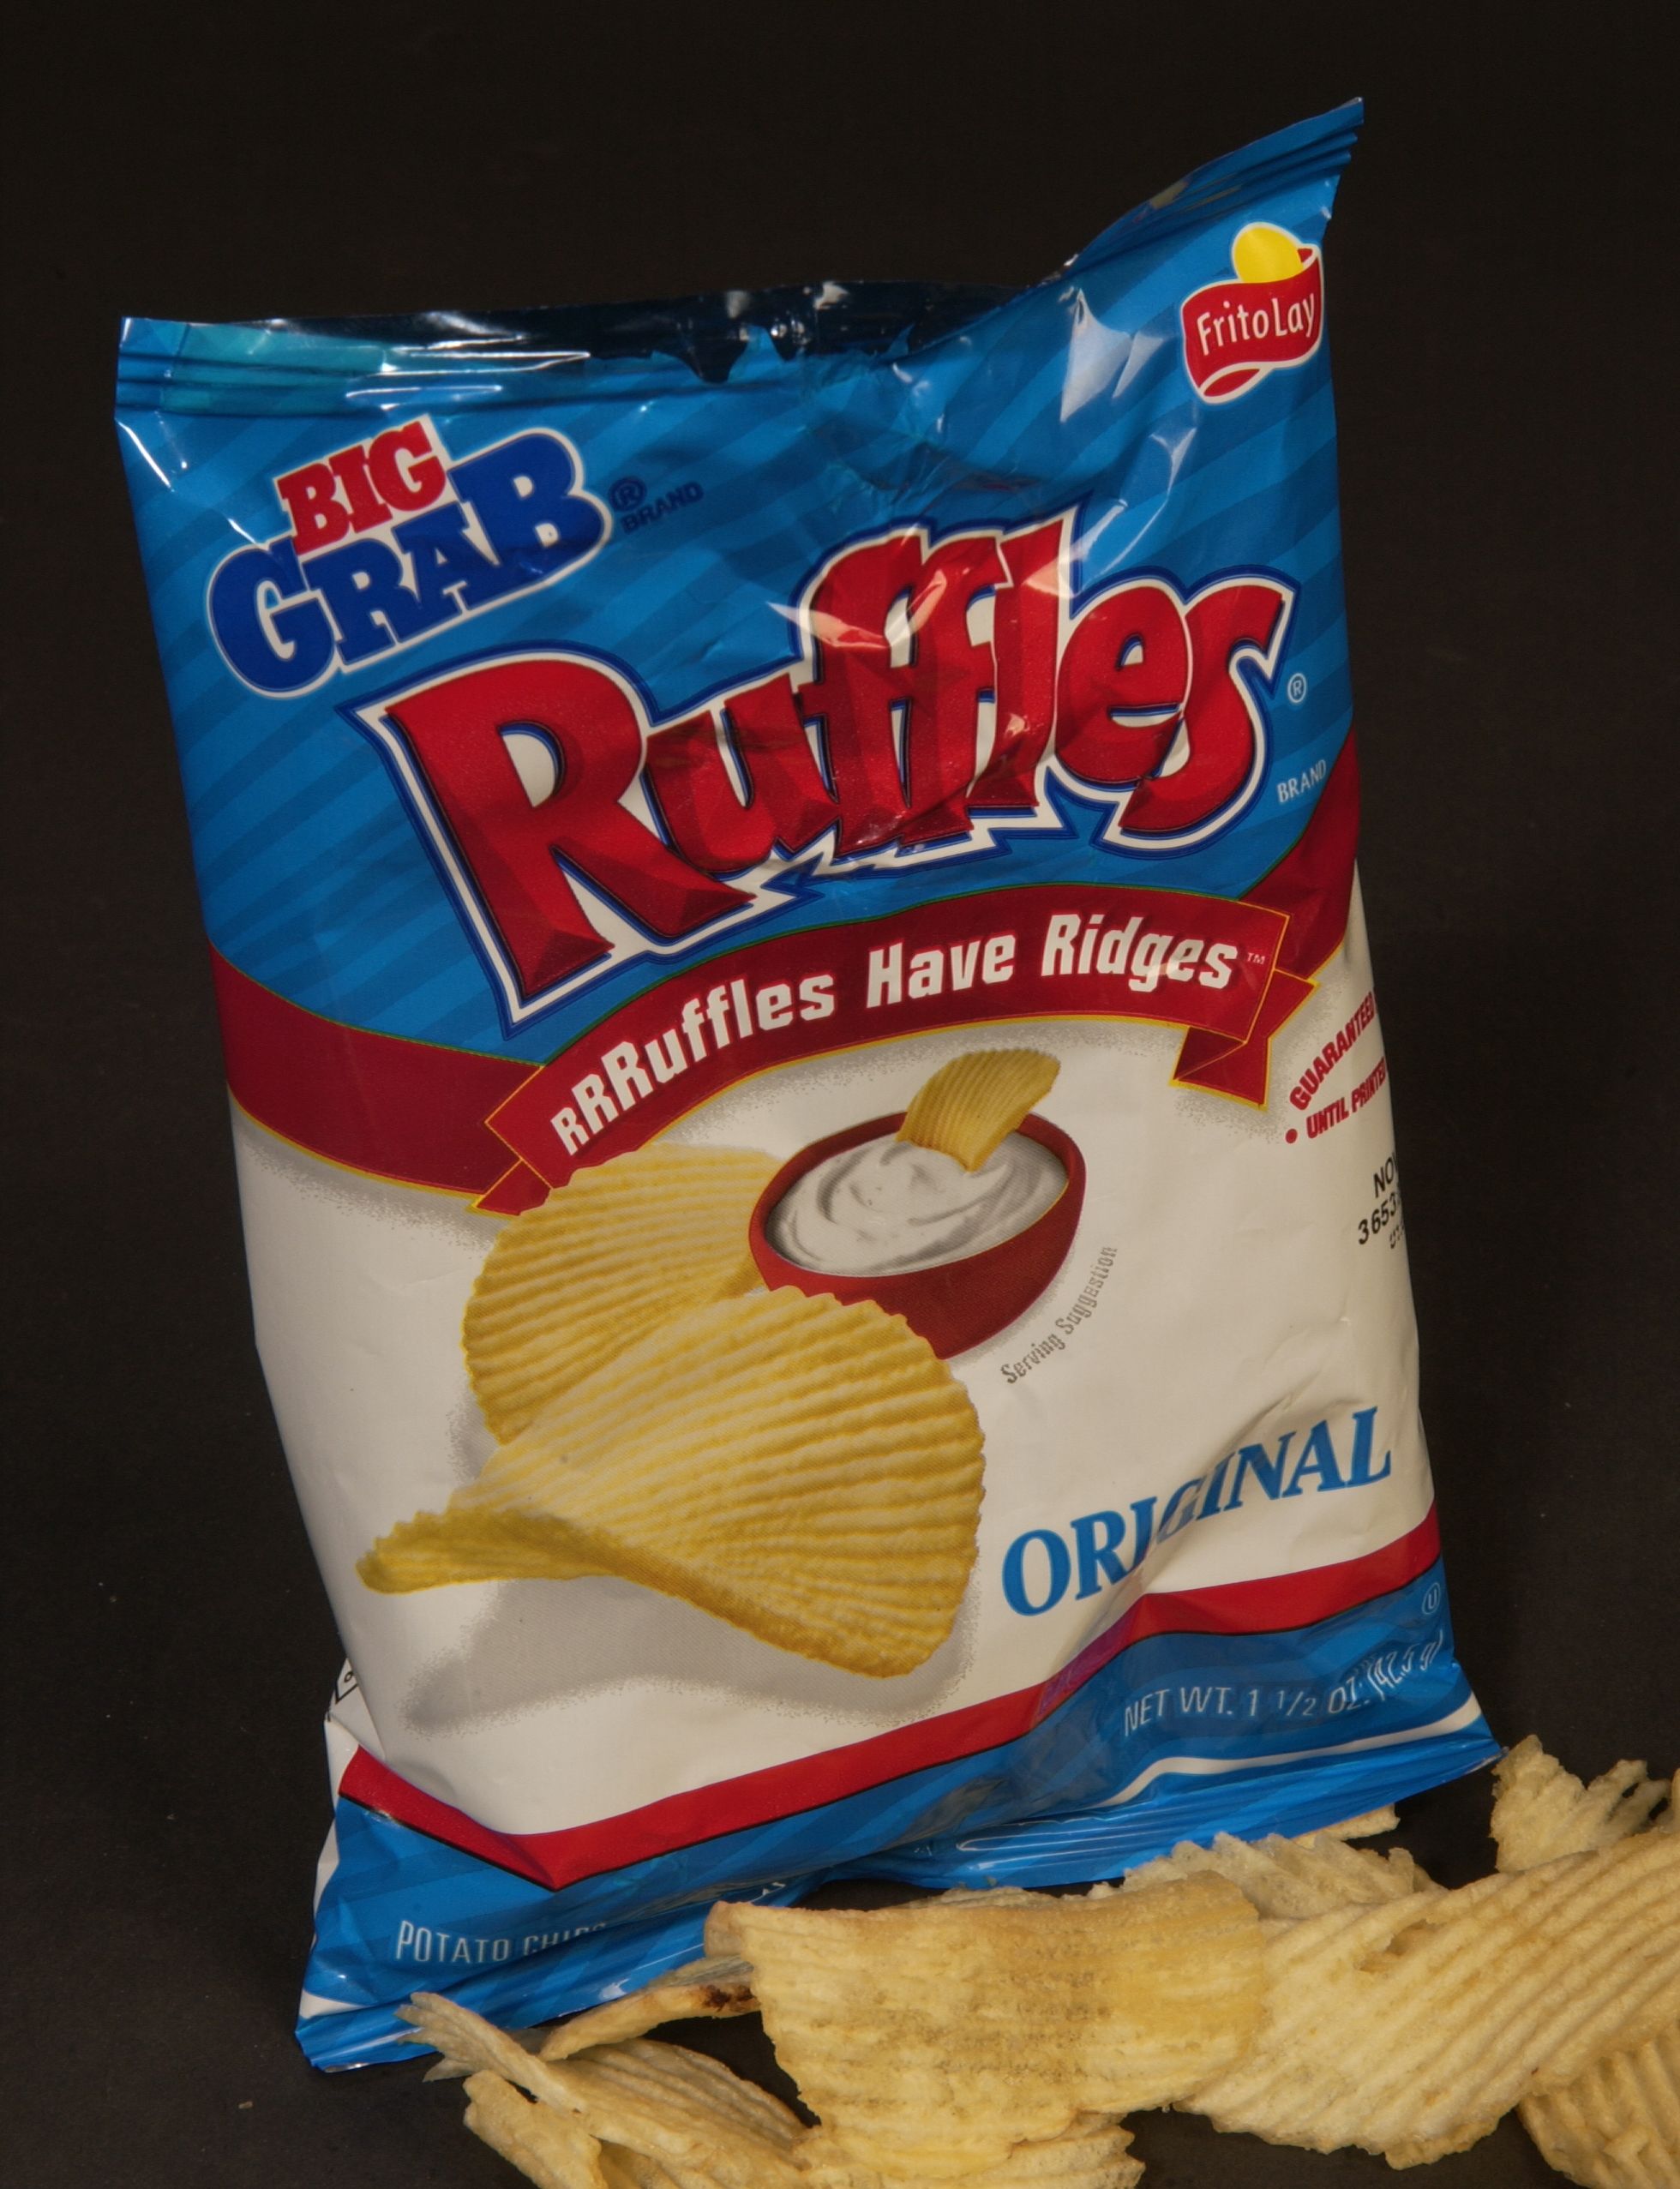 The Surprising History Of Your Favorite Chip Brands